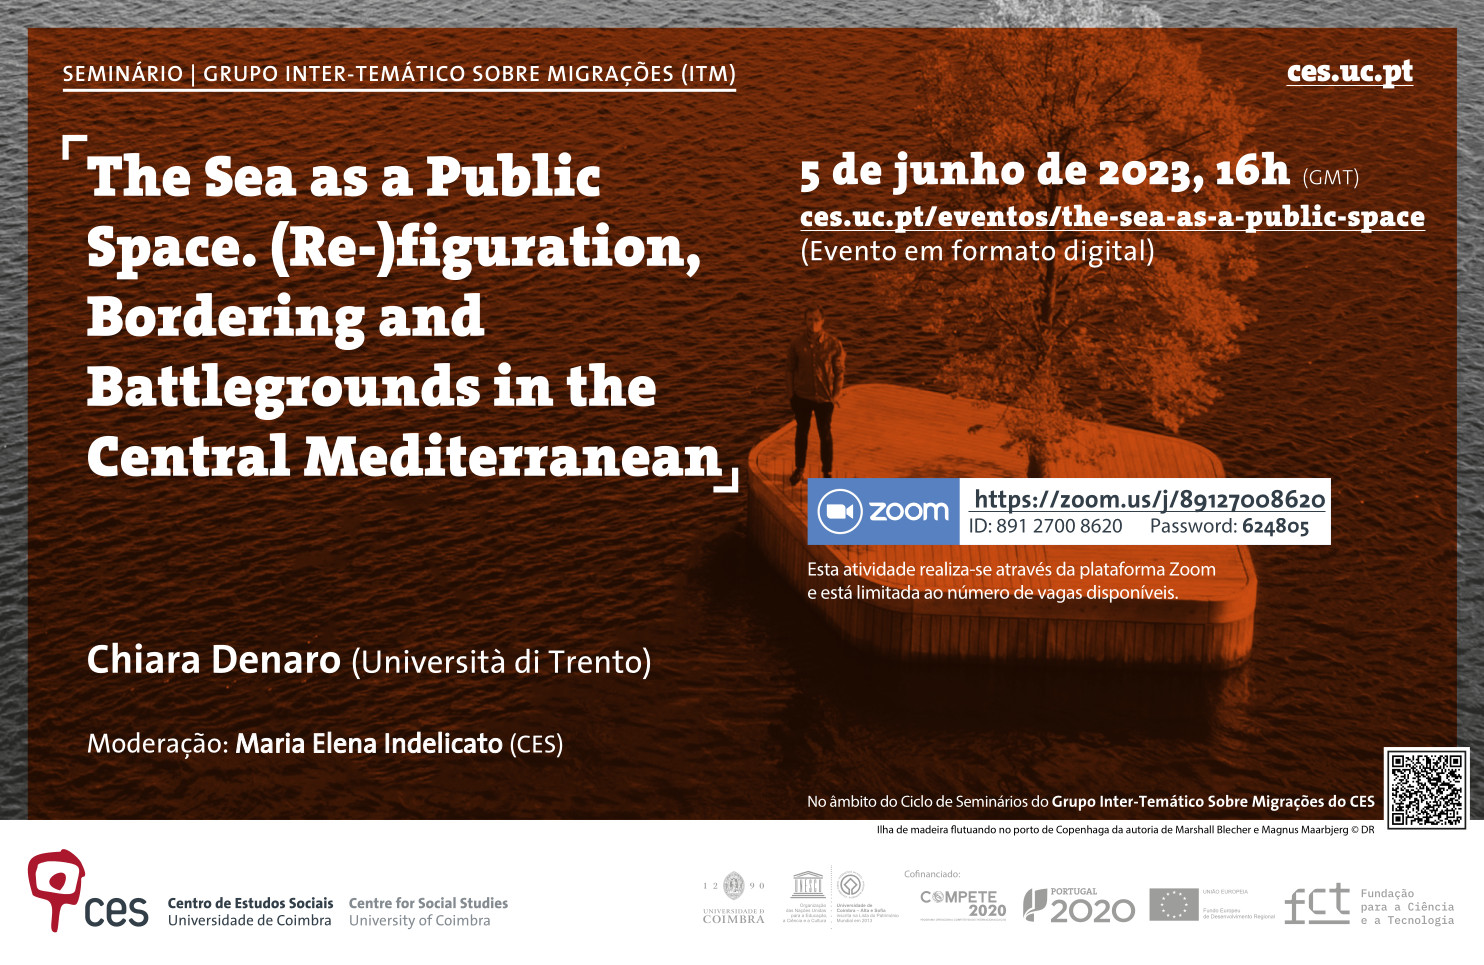 The Sea as a Public Space. (Re-)figuration, Bordering and Battlegrounds in the Central Mediterranean<span id="edit_43149"><script>$(function() { $('#edit_43149').load( "/myces/user/editobj.php?tipo=evento&id=43149" ); });</script></span>